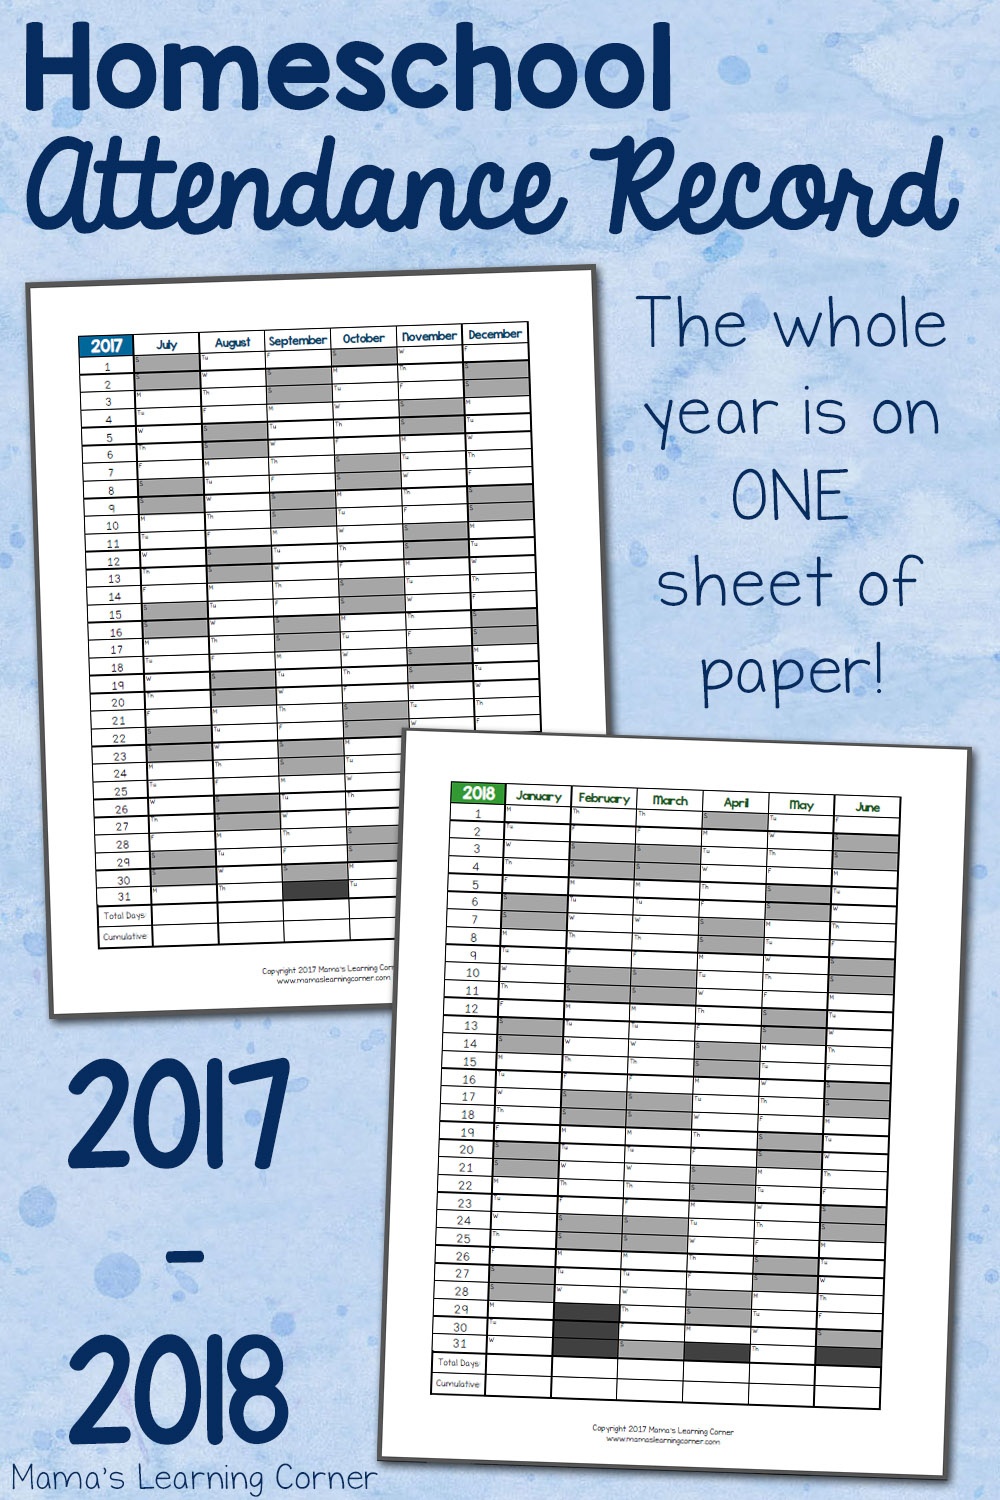 Simple Homeschool Attendance Record 2017-2018 - Mamas Learning Corner - Free Printable Attendance Sheets For Homeschool